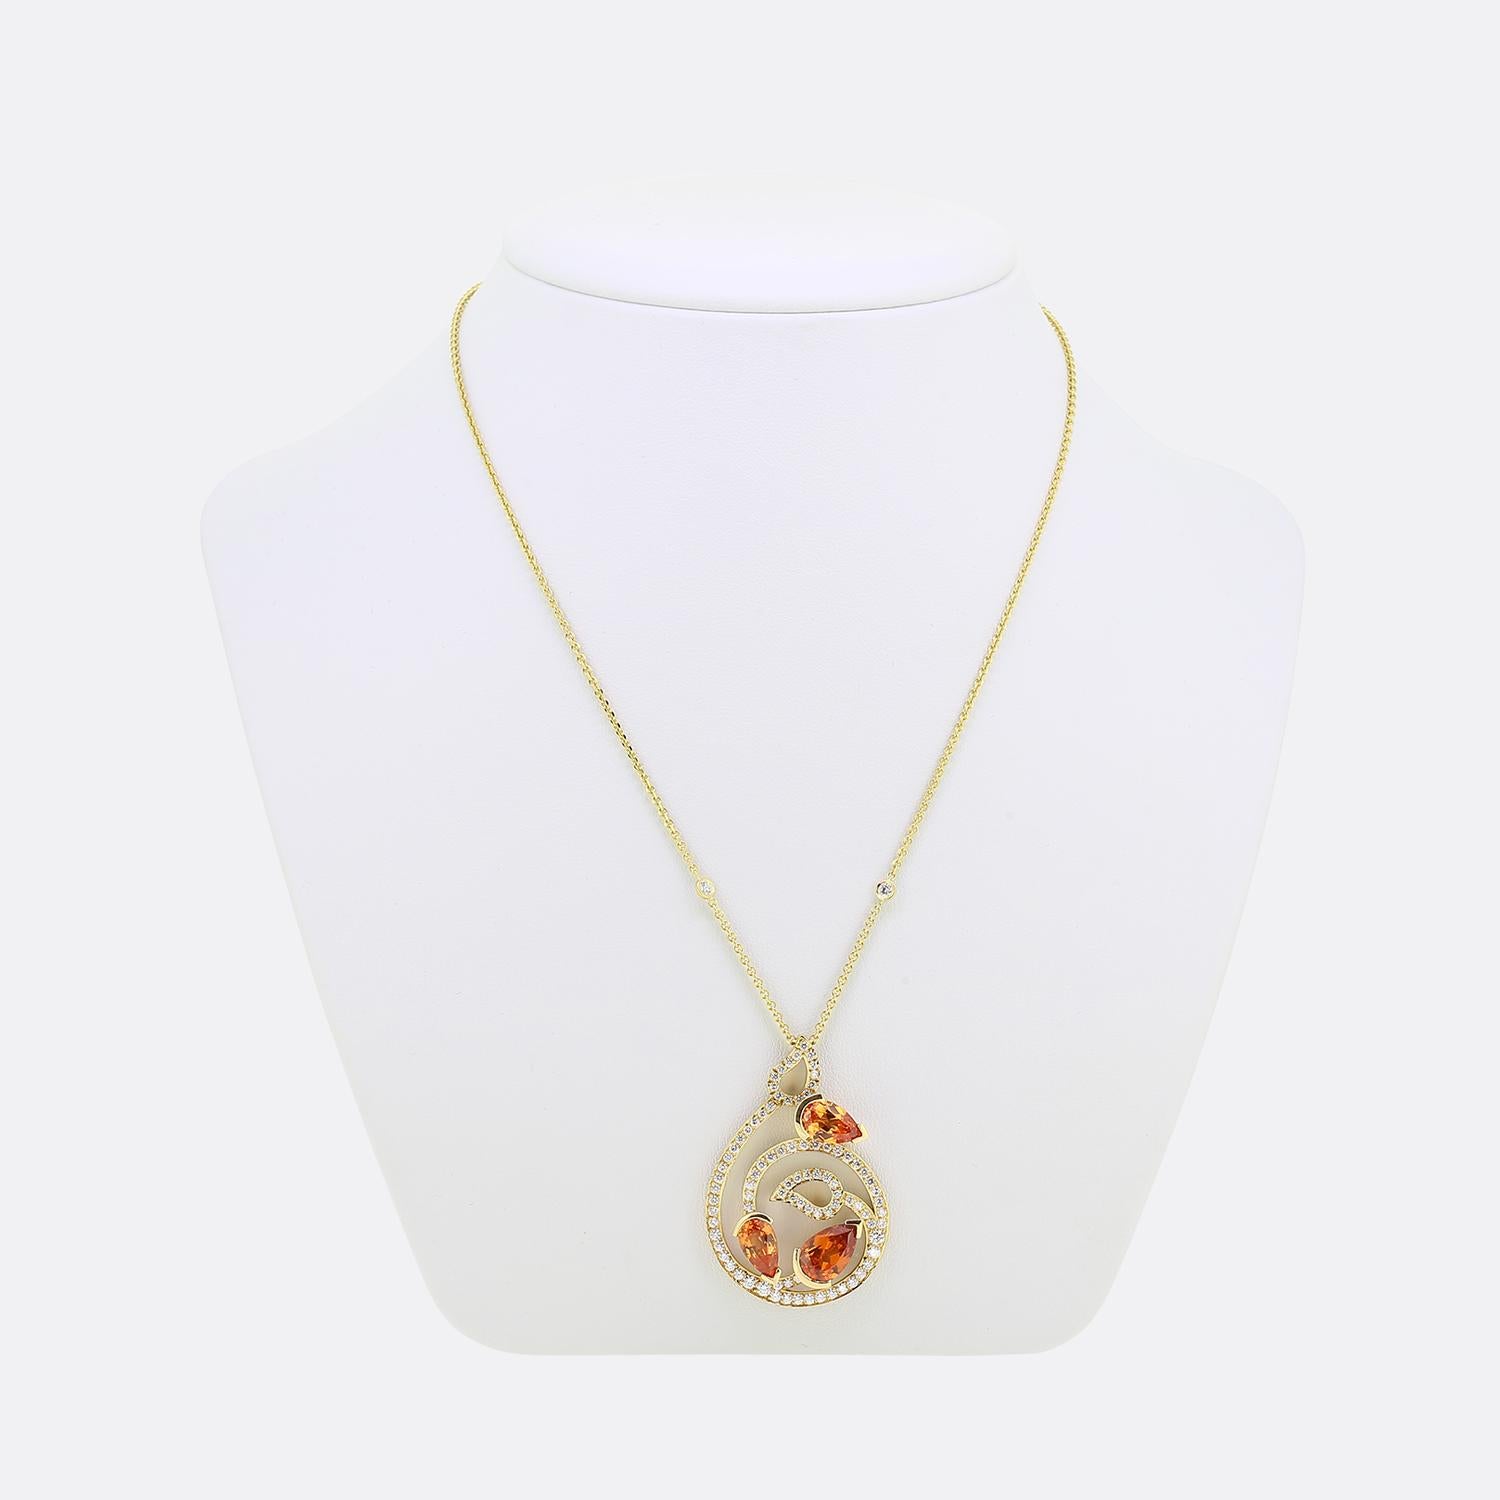 Here we have a fabulous pendant necklace from renowned jewellery designer, Boodles. This pendant has been excellently crafted from 18ct yellow gold with an open curvaceous framework playing host to single row of perfectly matched round brilliant cut